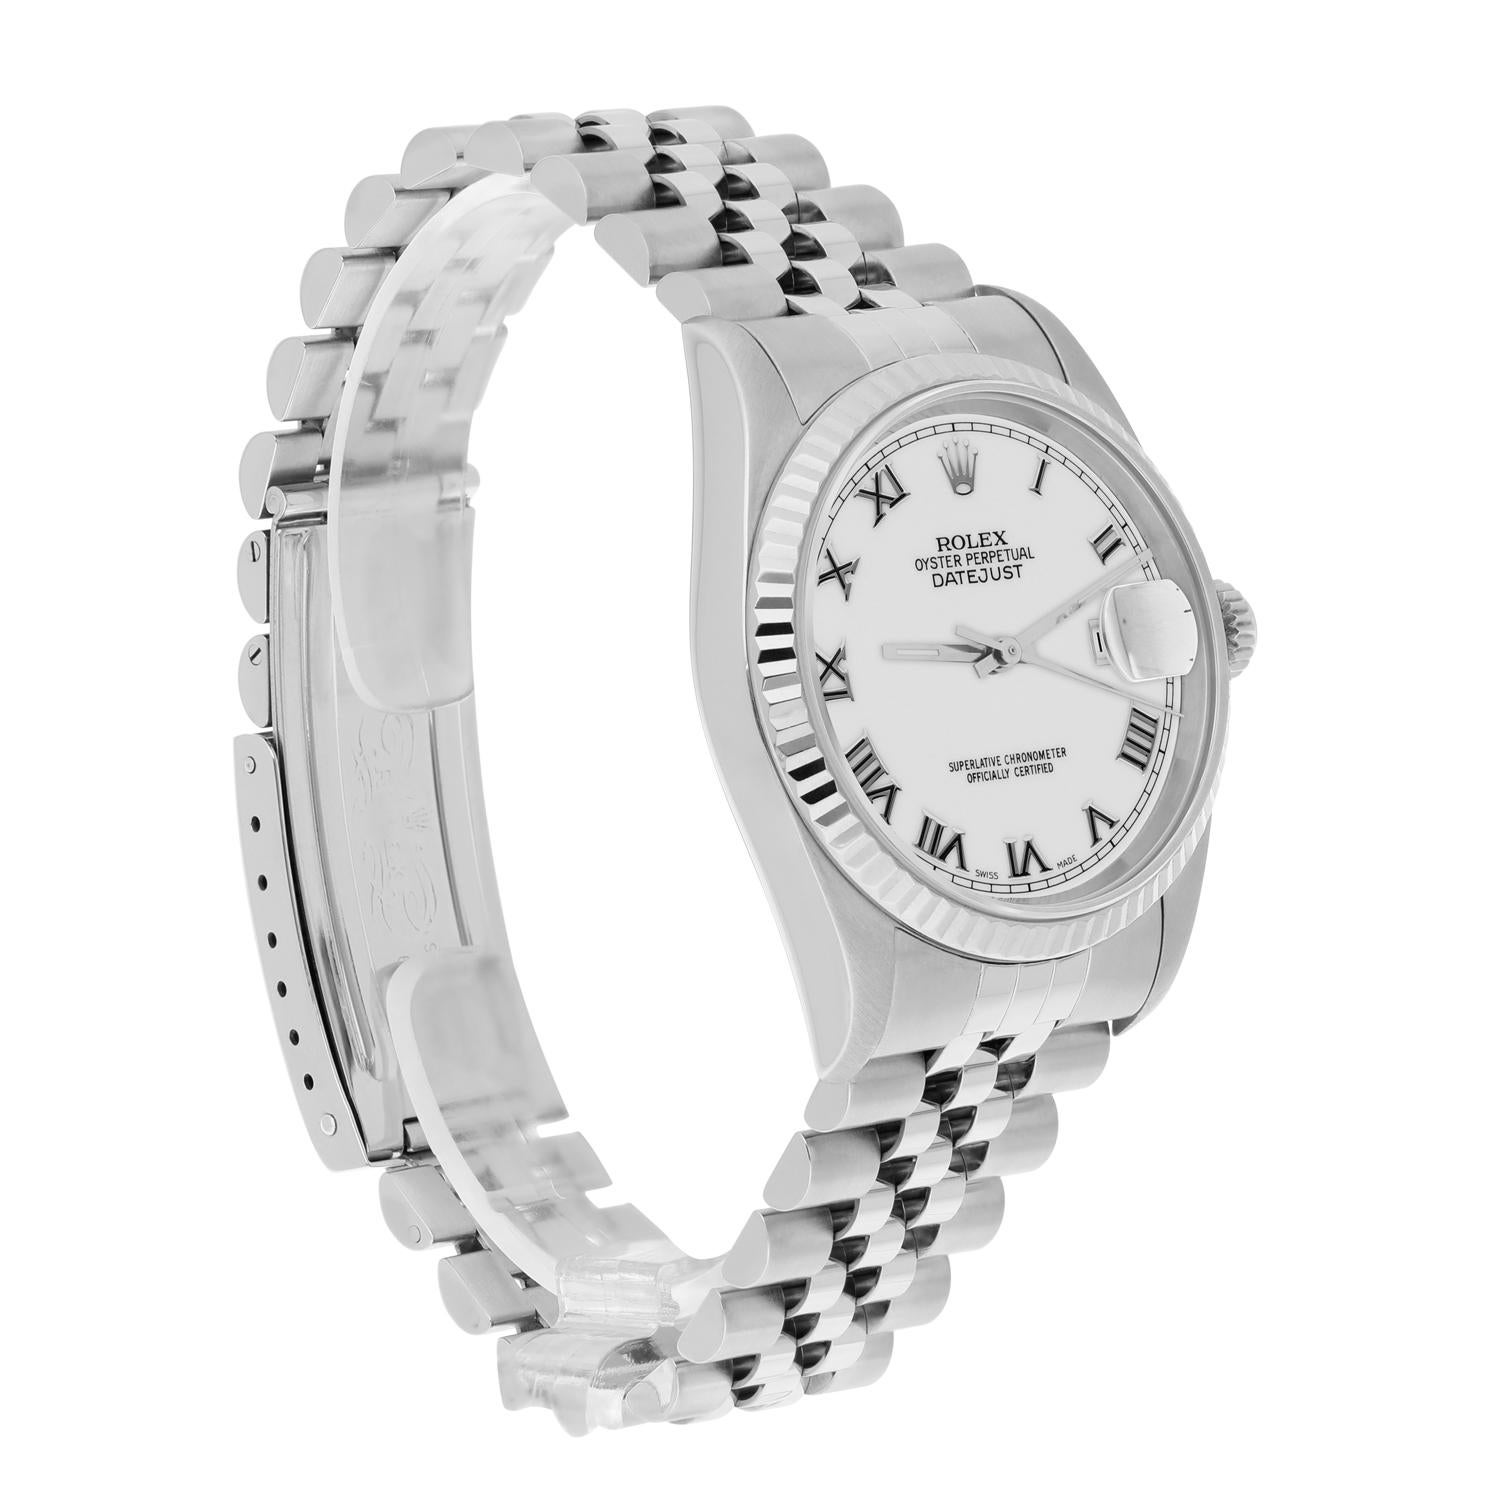 Rolex Datejust 36mm Stainless Steel 16234 White Roman Dial, Jubilee Circa 1995 For Sale 2